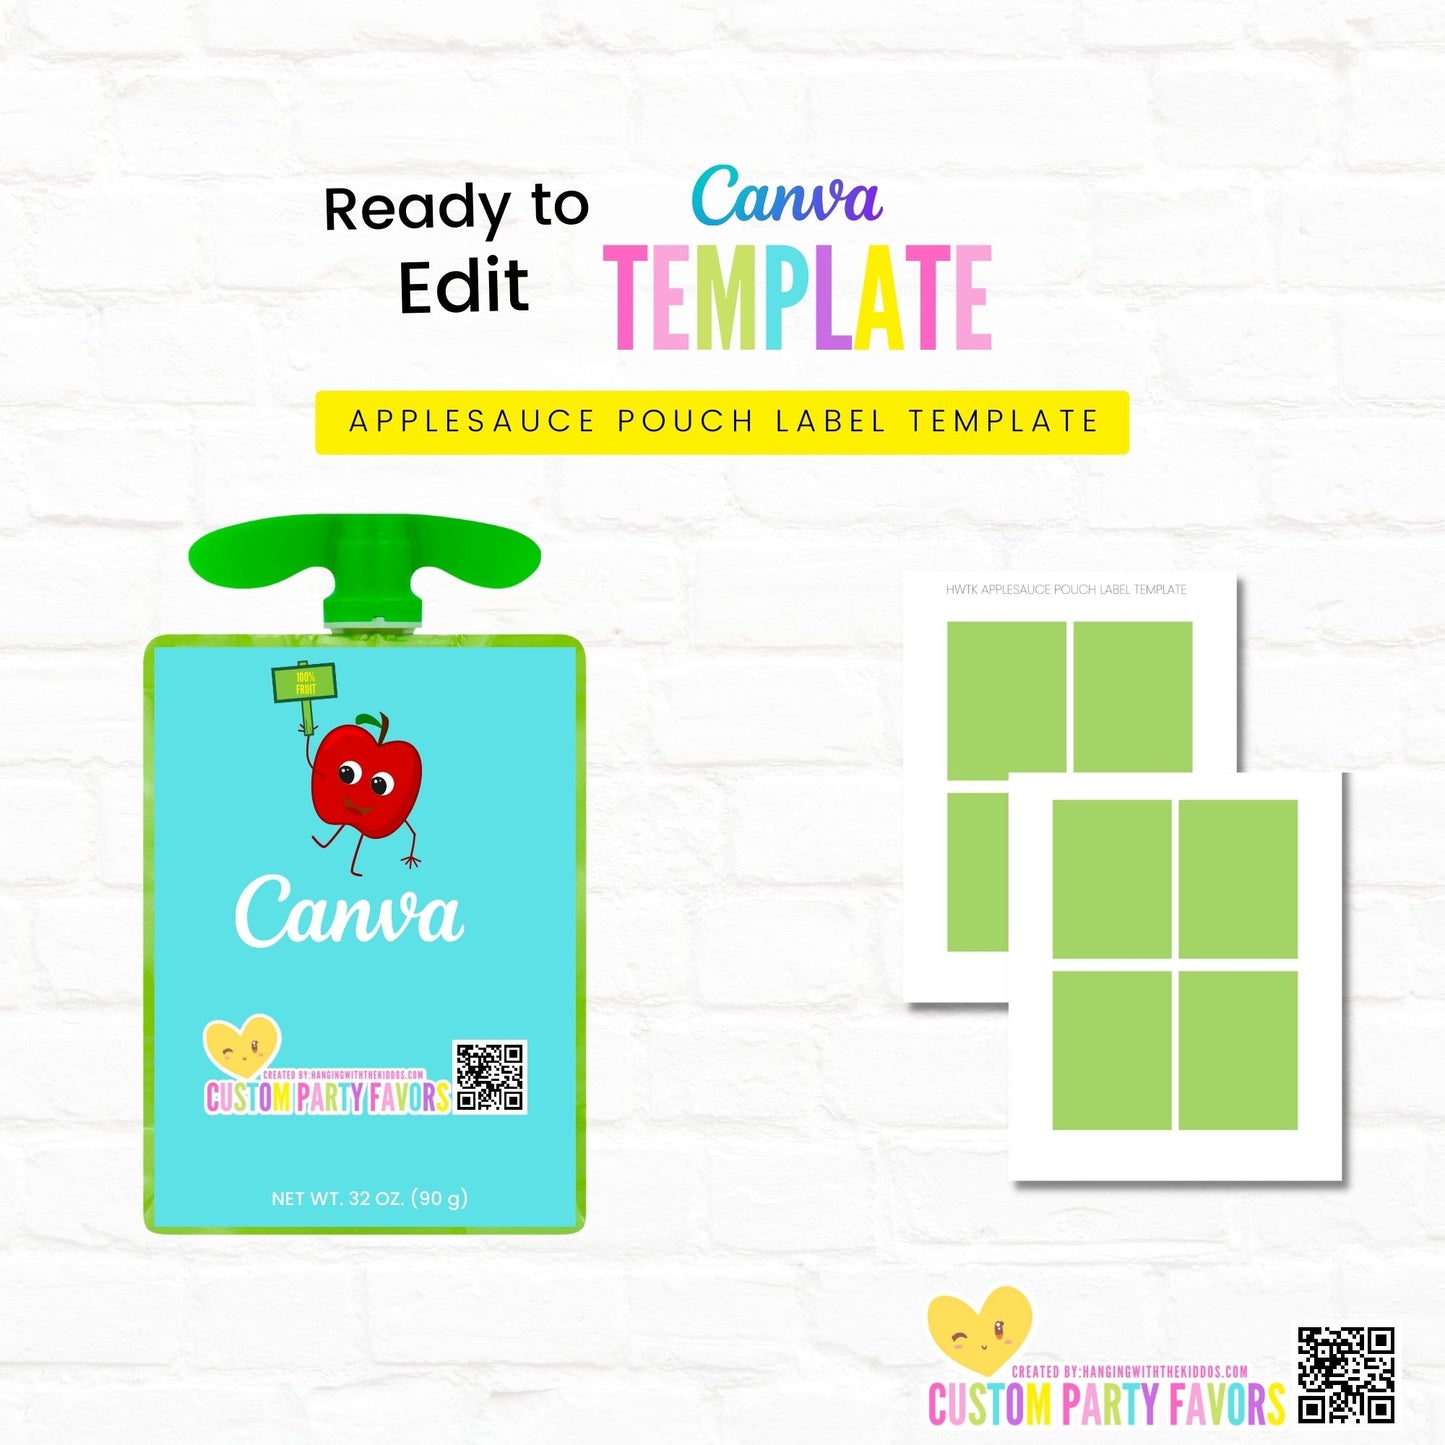 APPLESAUCE POUCH LABEL TEMPLATE